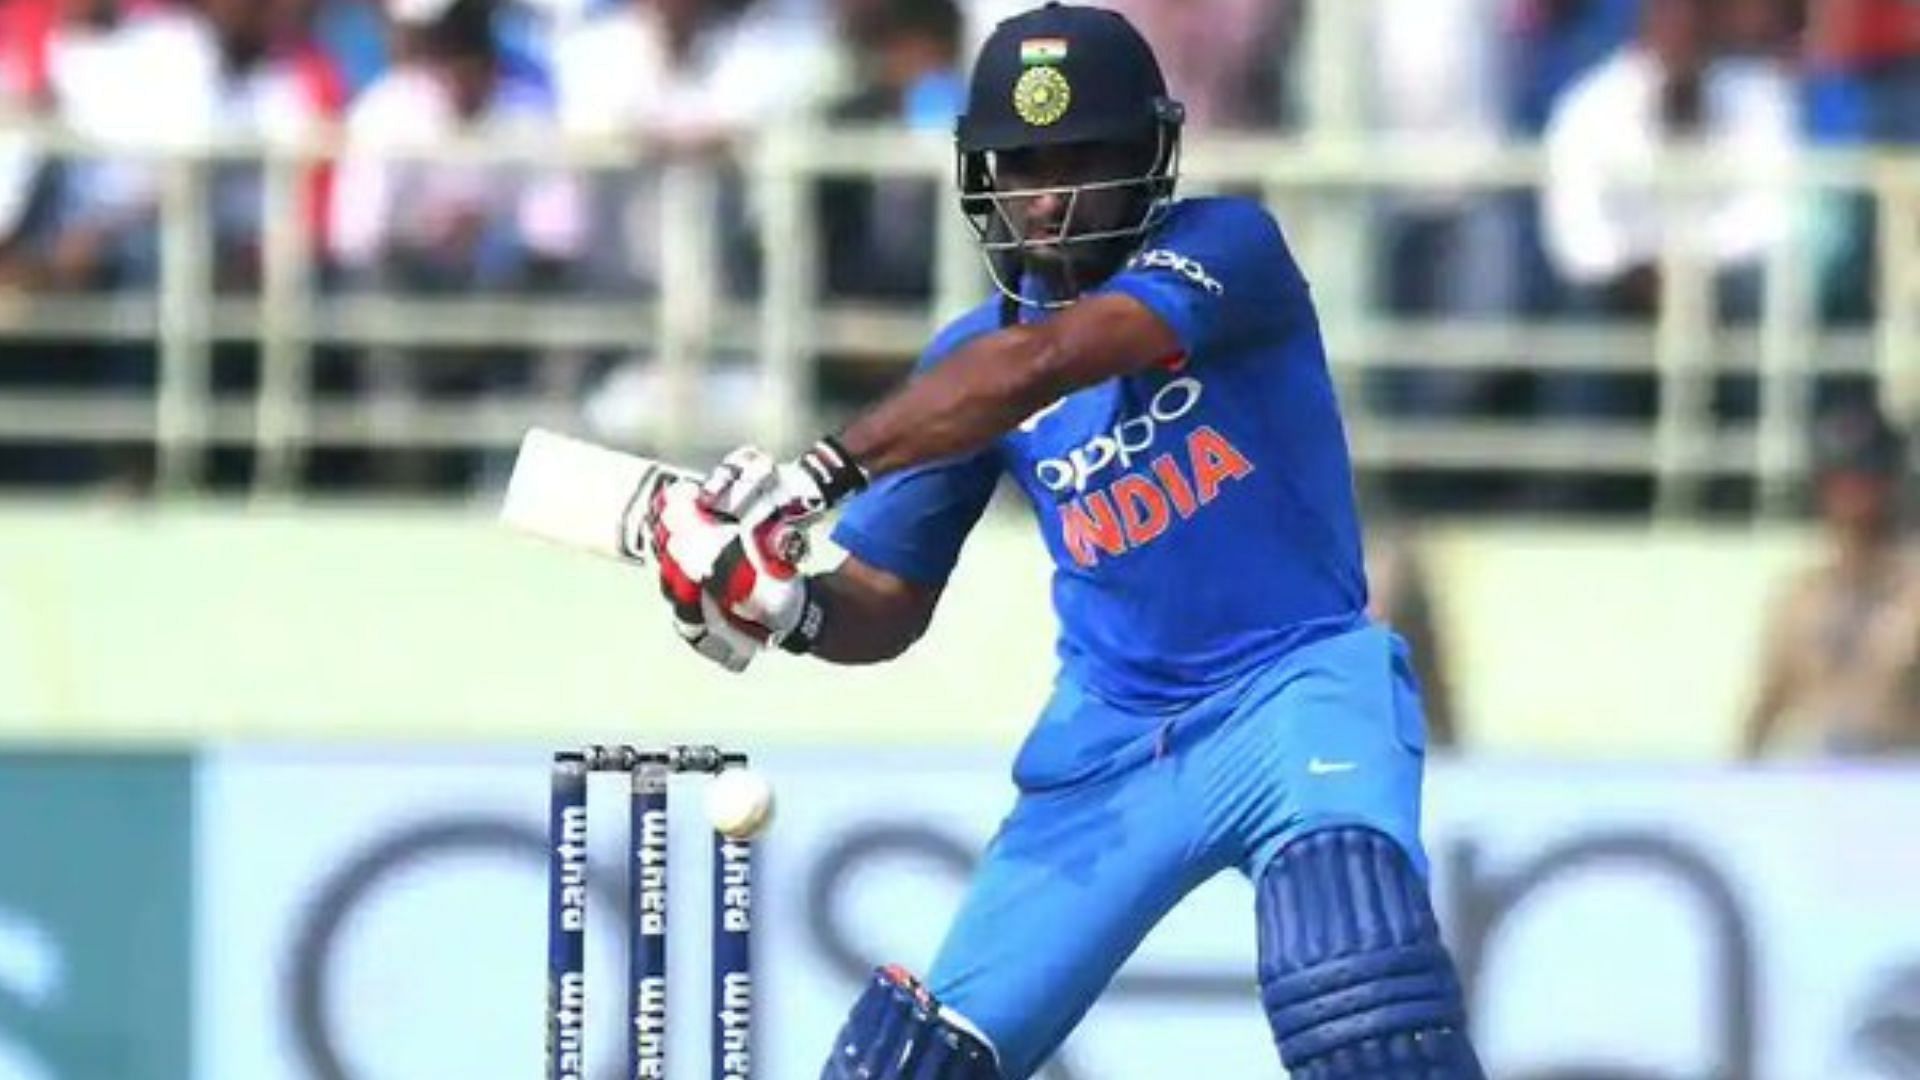 Rayudu was omitted from the 2019 World Cup squad at the last hour.